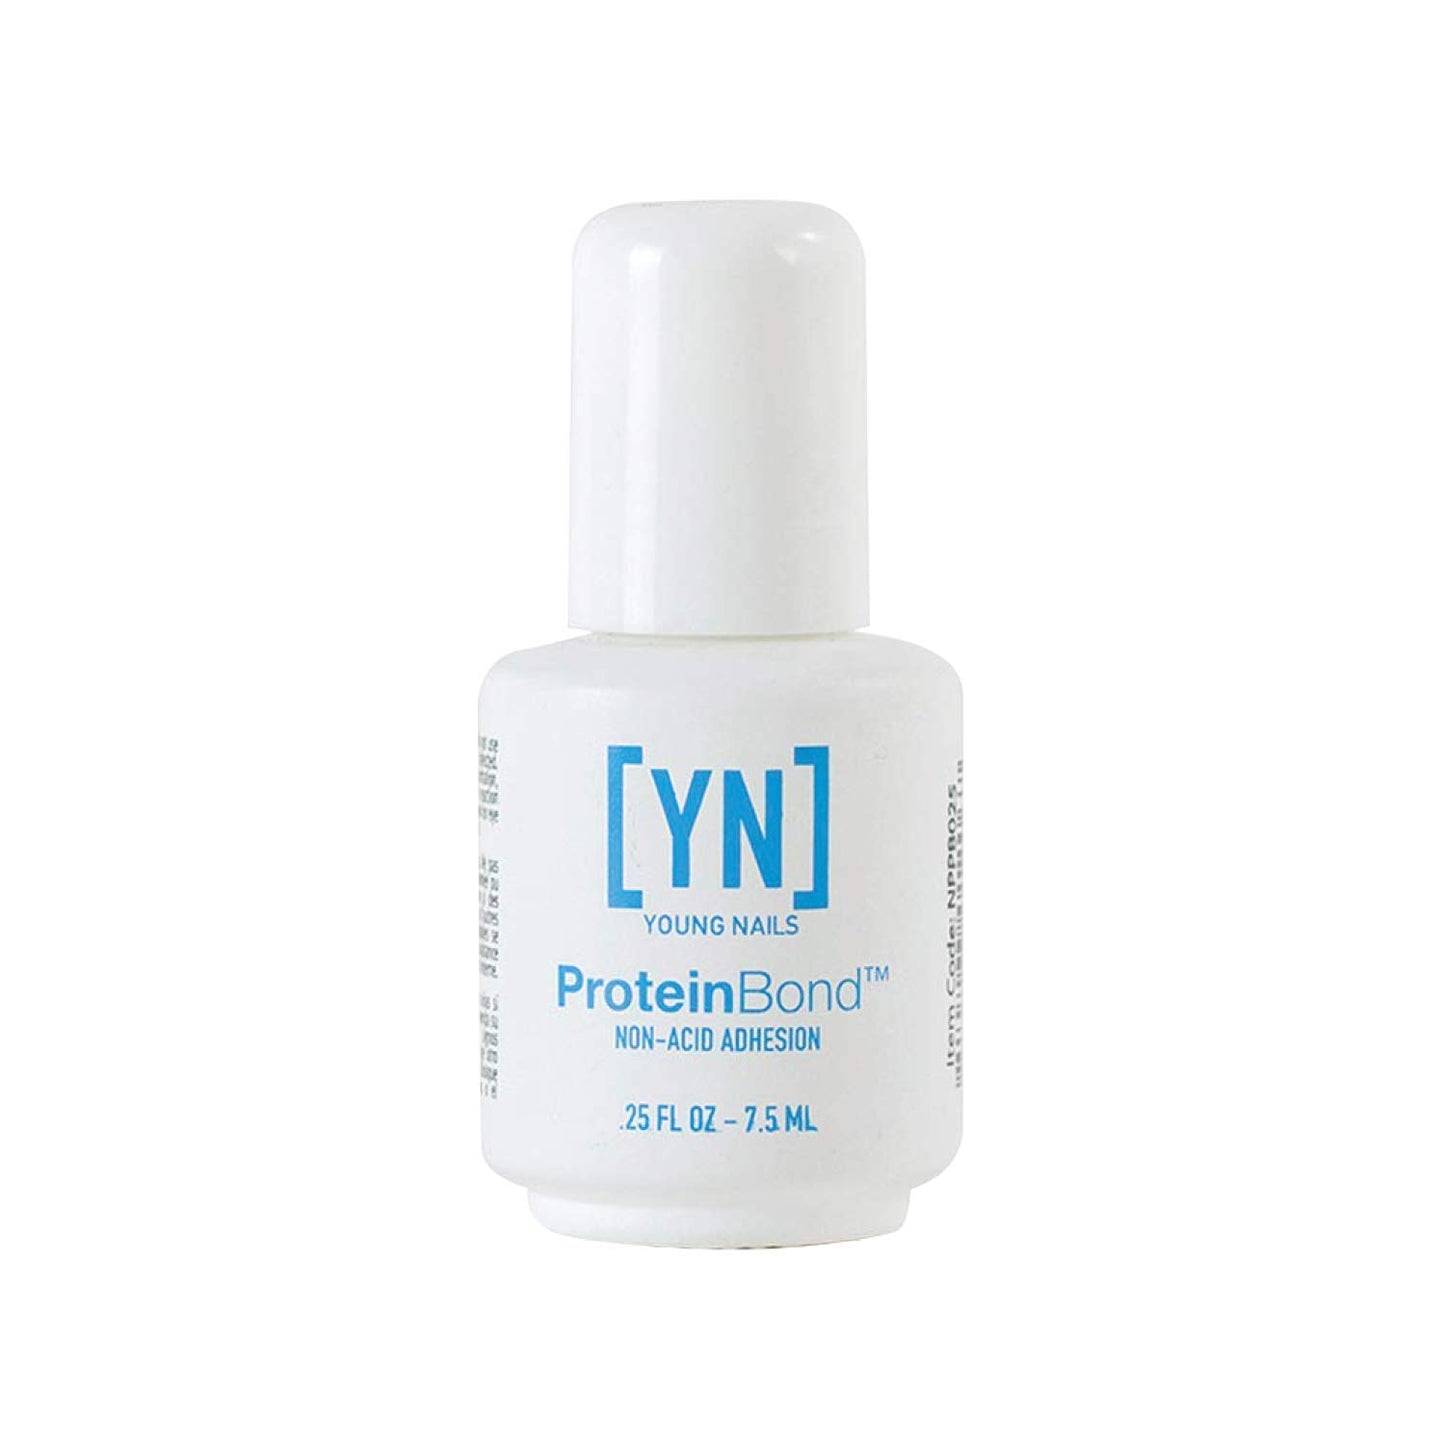 If you have any sort of issues with lifting or nails popping off, we recommend giving this Young Nails Protein Bond a try.